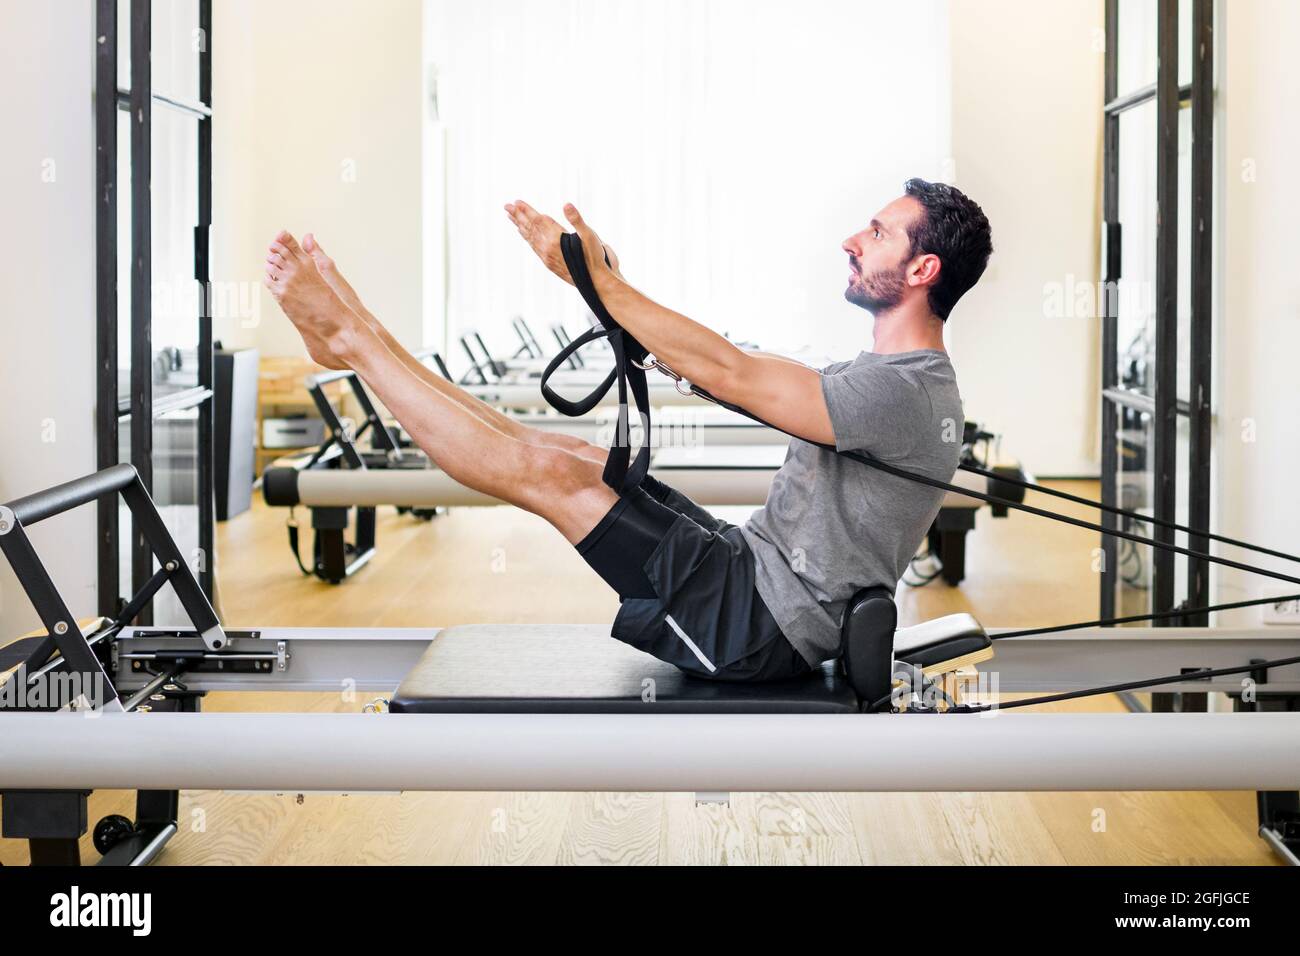 Fit muscular man doing a teaser pilates exercise on a reformer in a gym to strengthen his core and abdominal muscles in a side view with copyspace Stock Photo